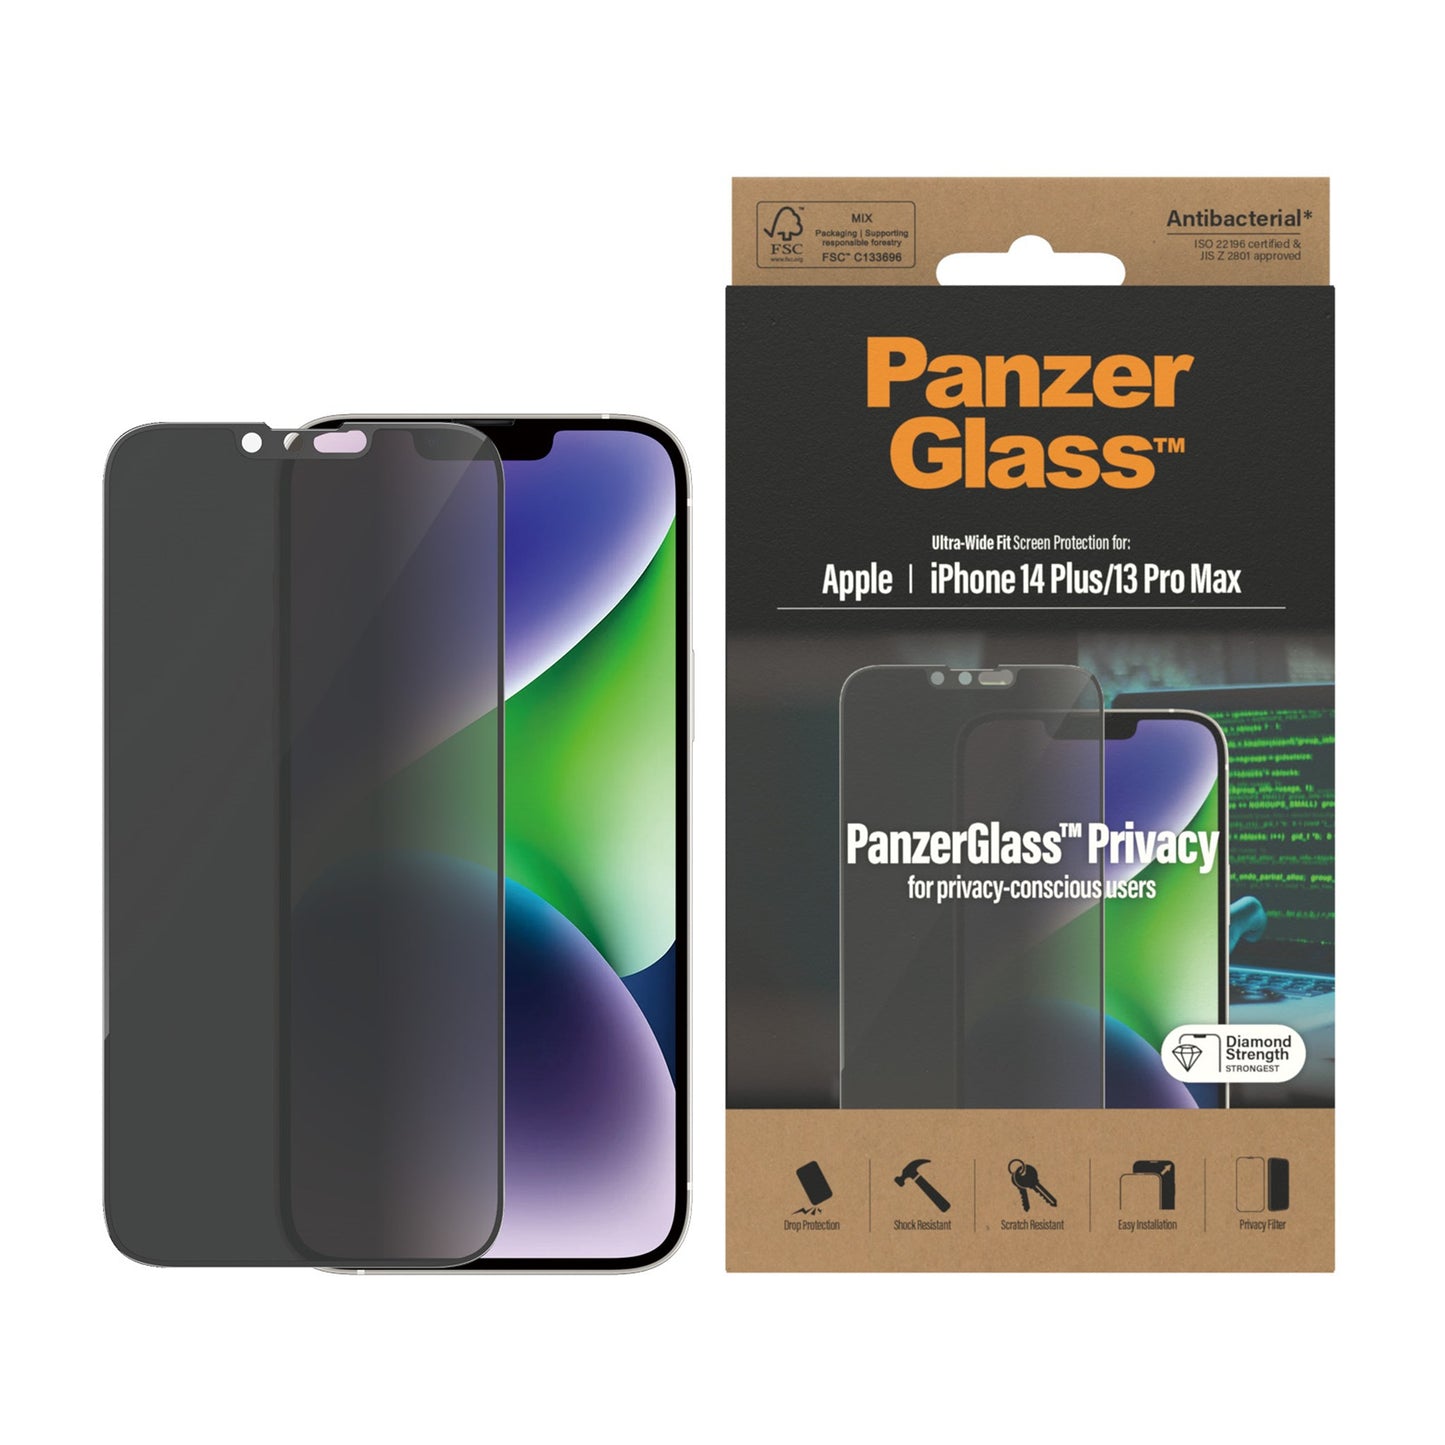 PanzerGlass™ Privacy Screen Protector Apple iPhone 14 Plus | 13 Pro Max | Ultra-Wide Fit 2